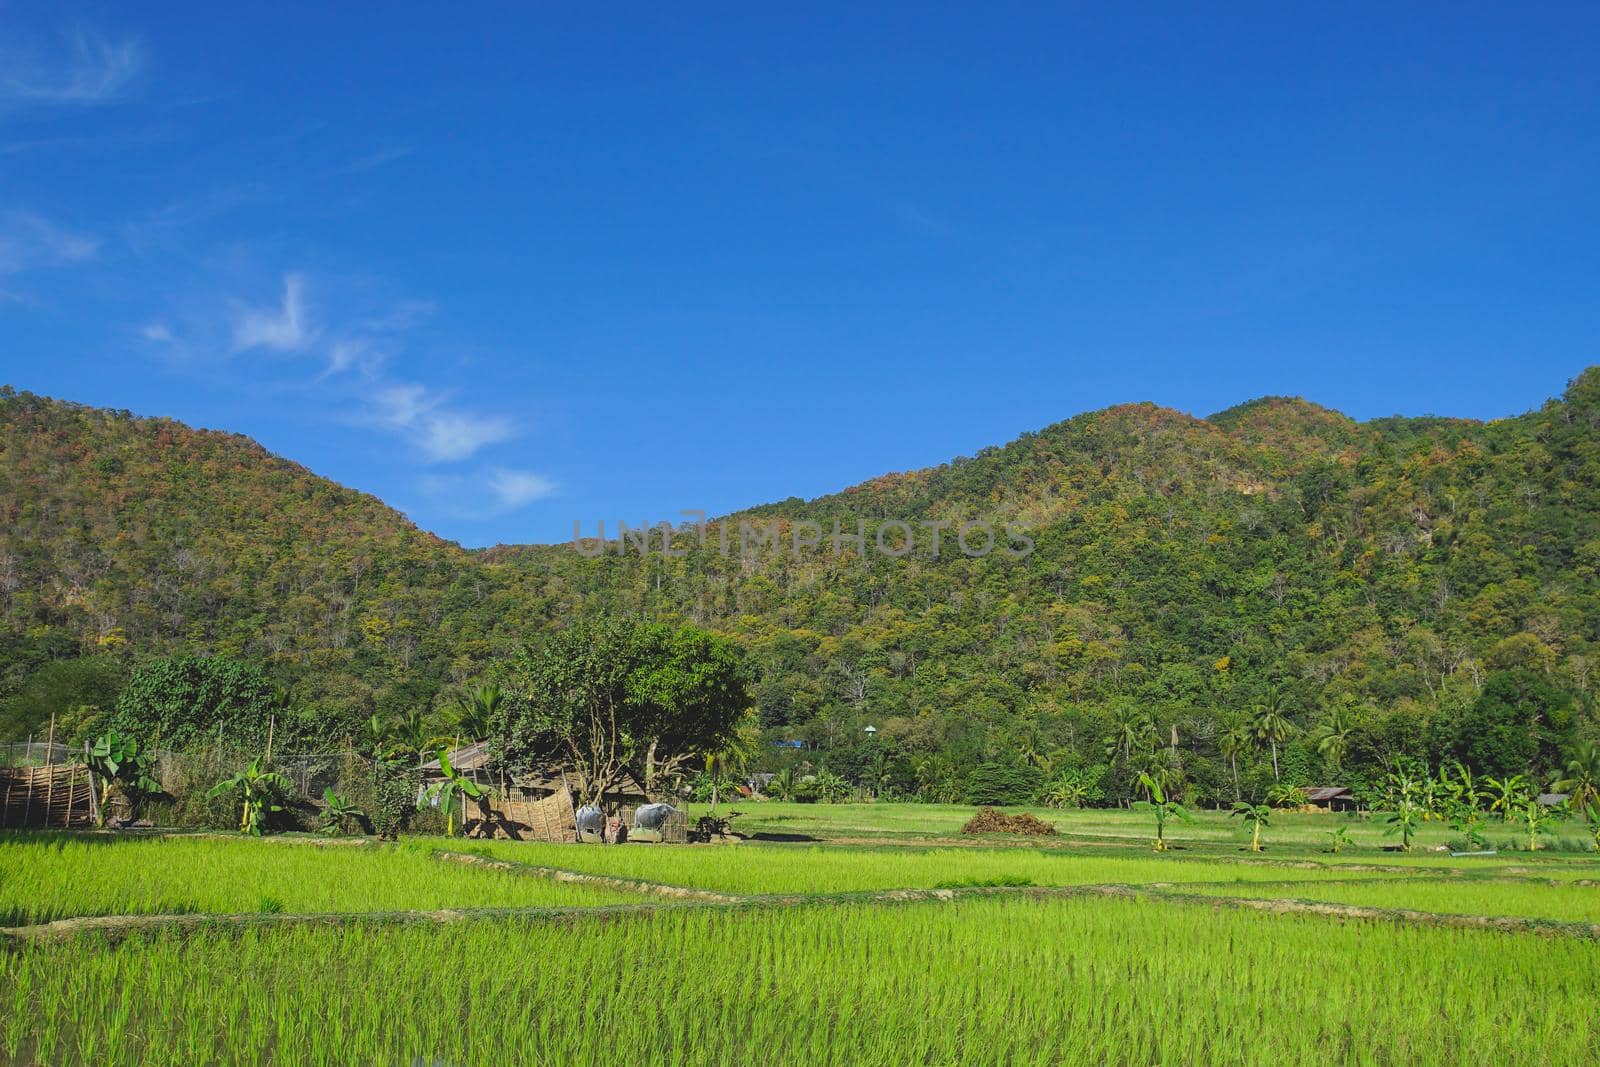 Landscape of paddy field in Pha Bong Village, Mae Hong Son province, Thailand.